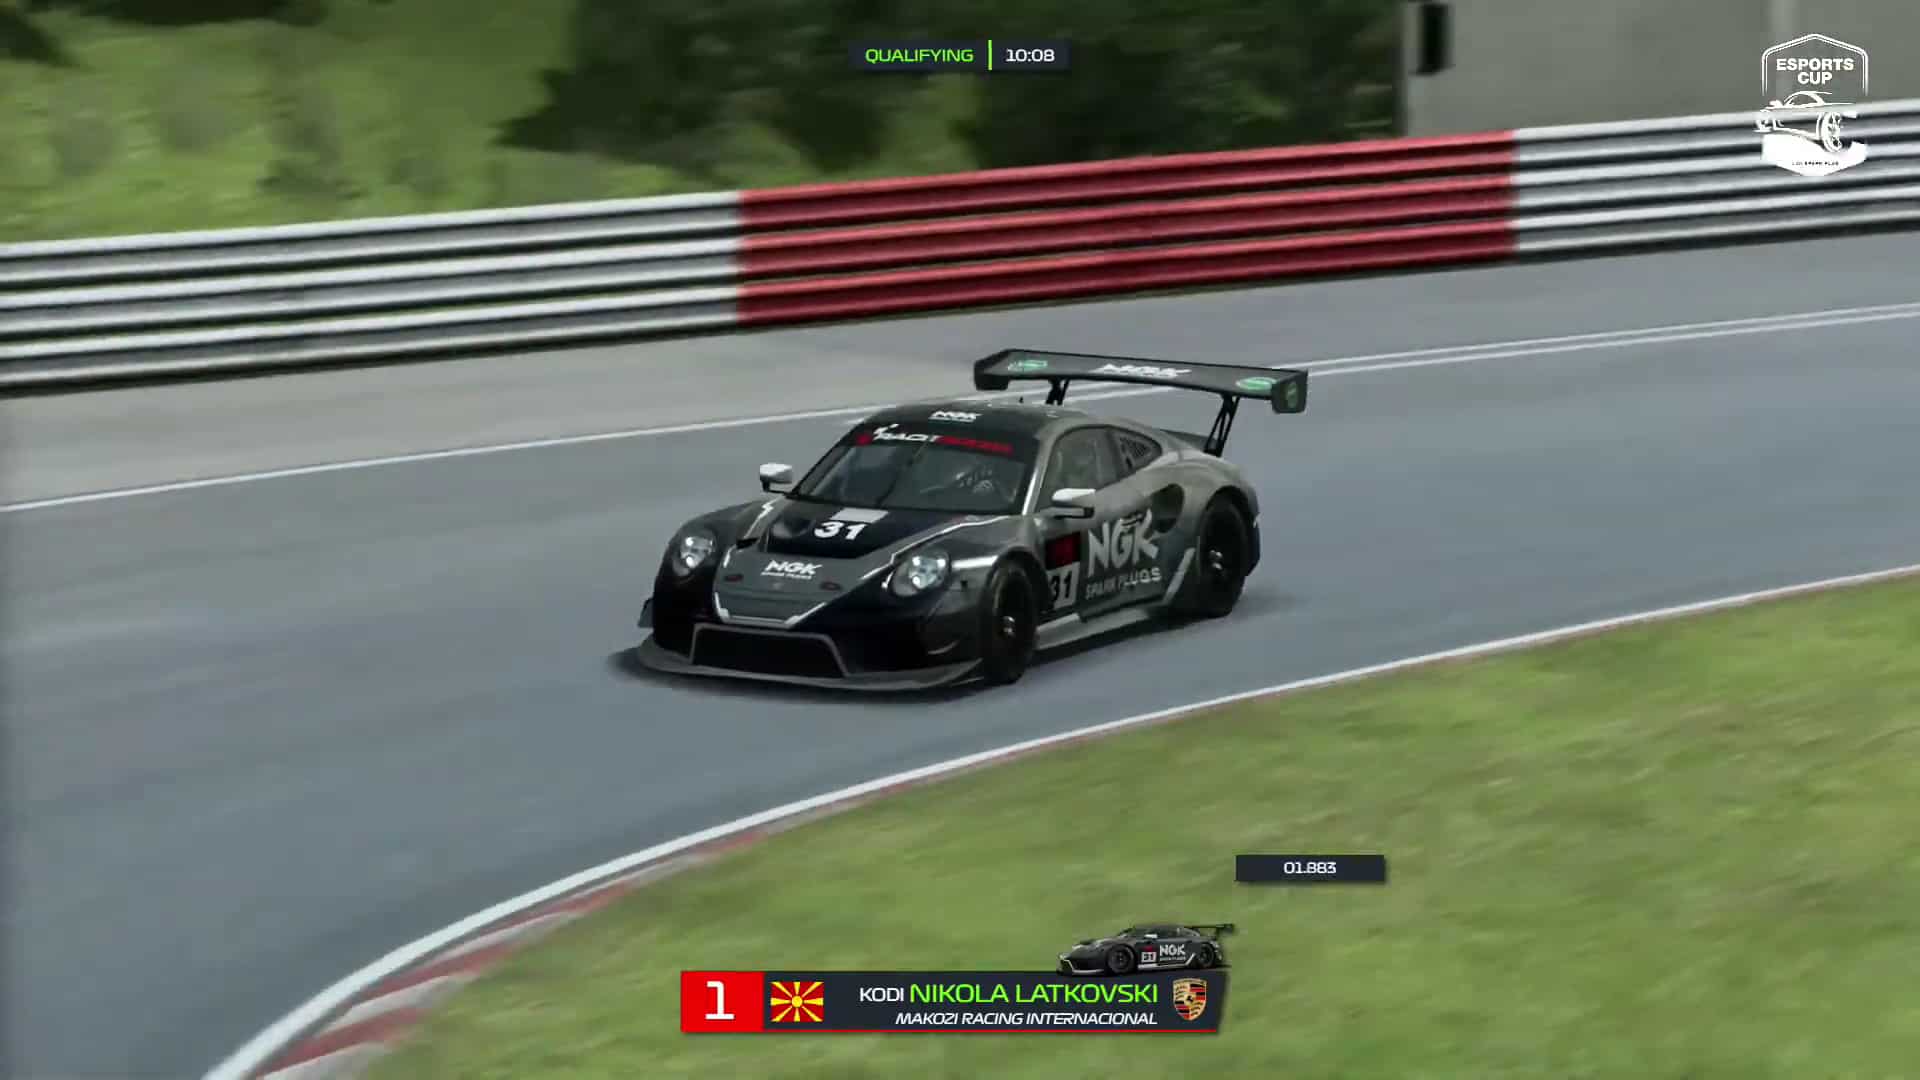 NGK Spark Plug Esports Cup Latkovski destroys competition in Nordschleife finale Traxion